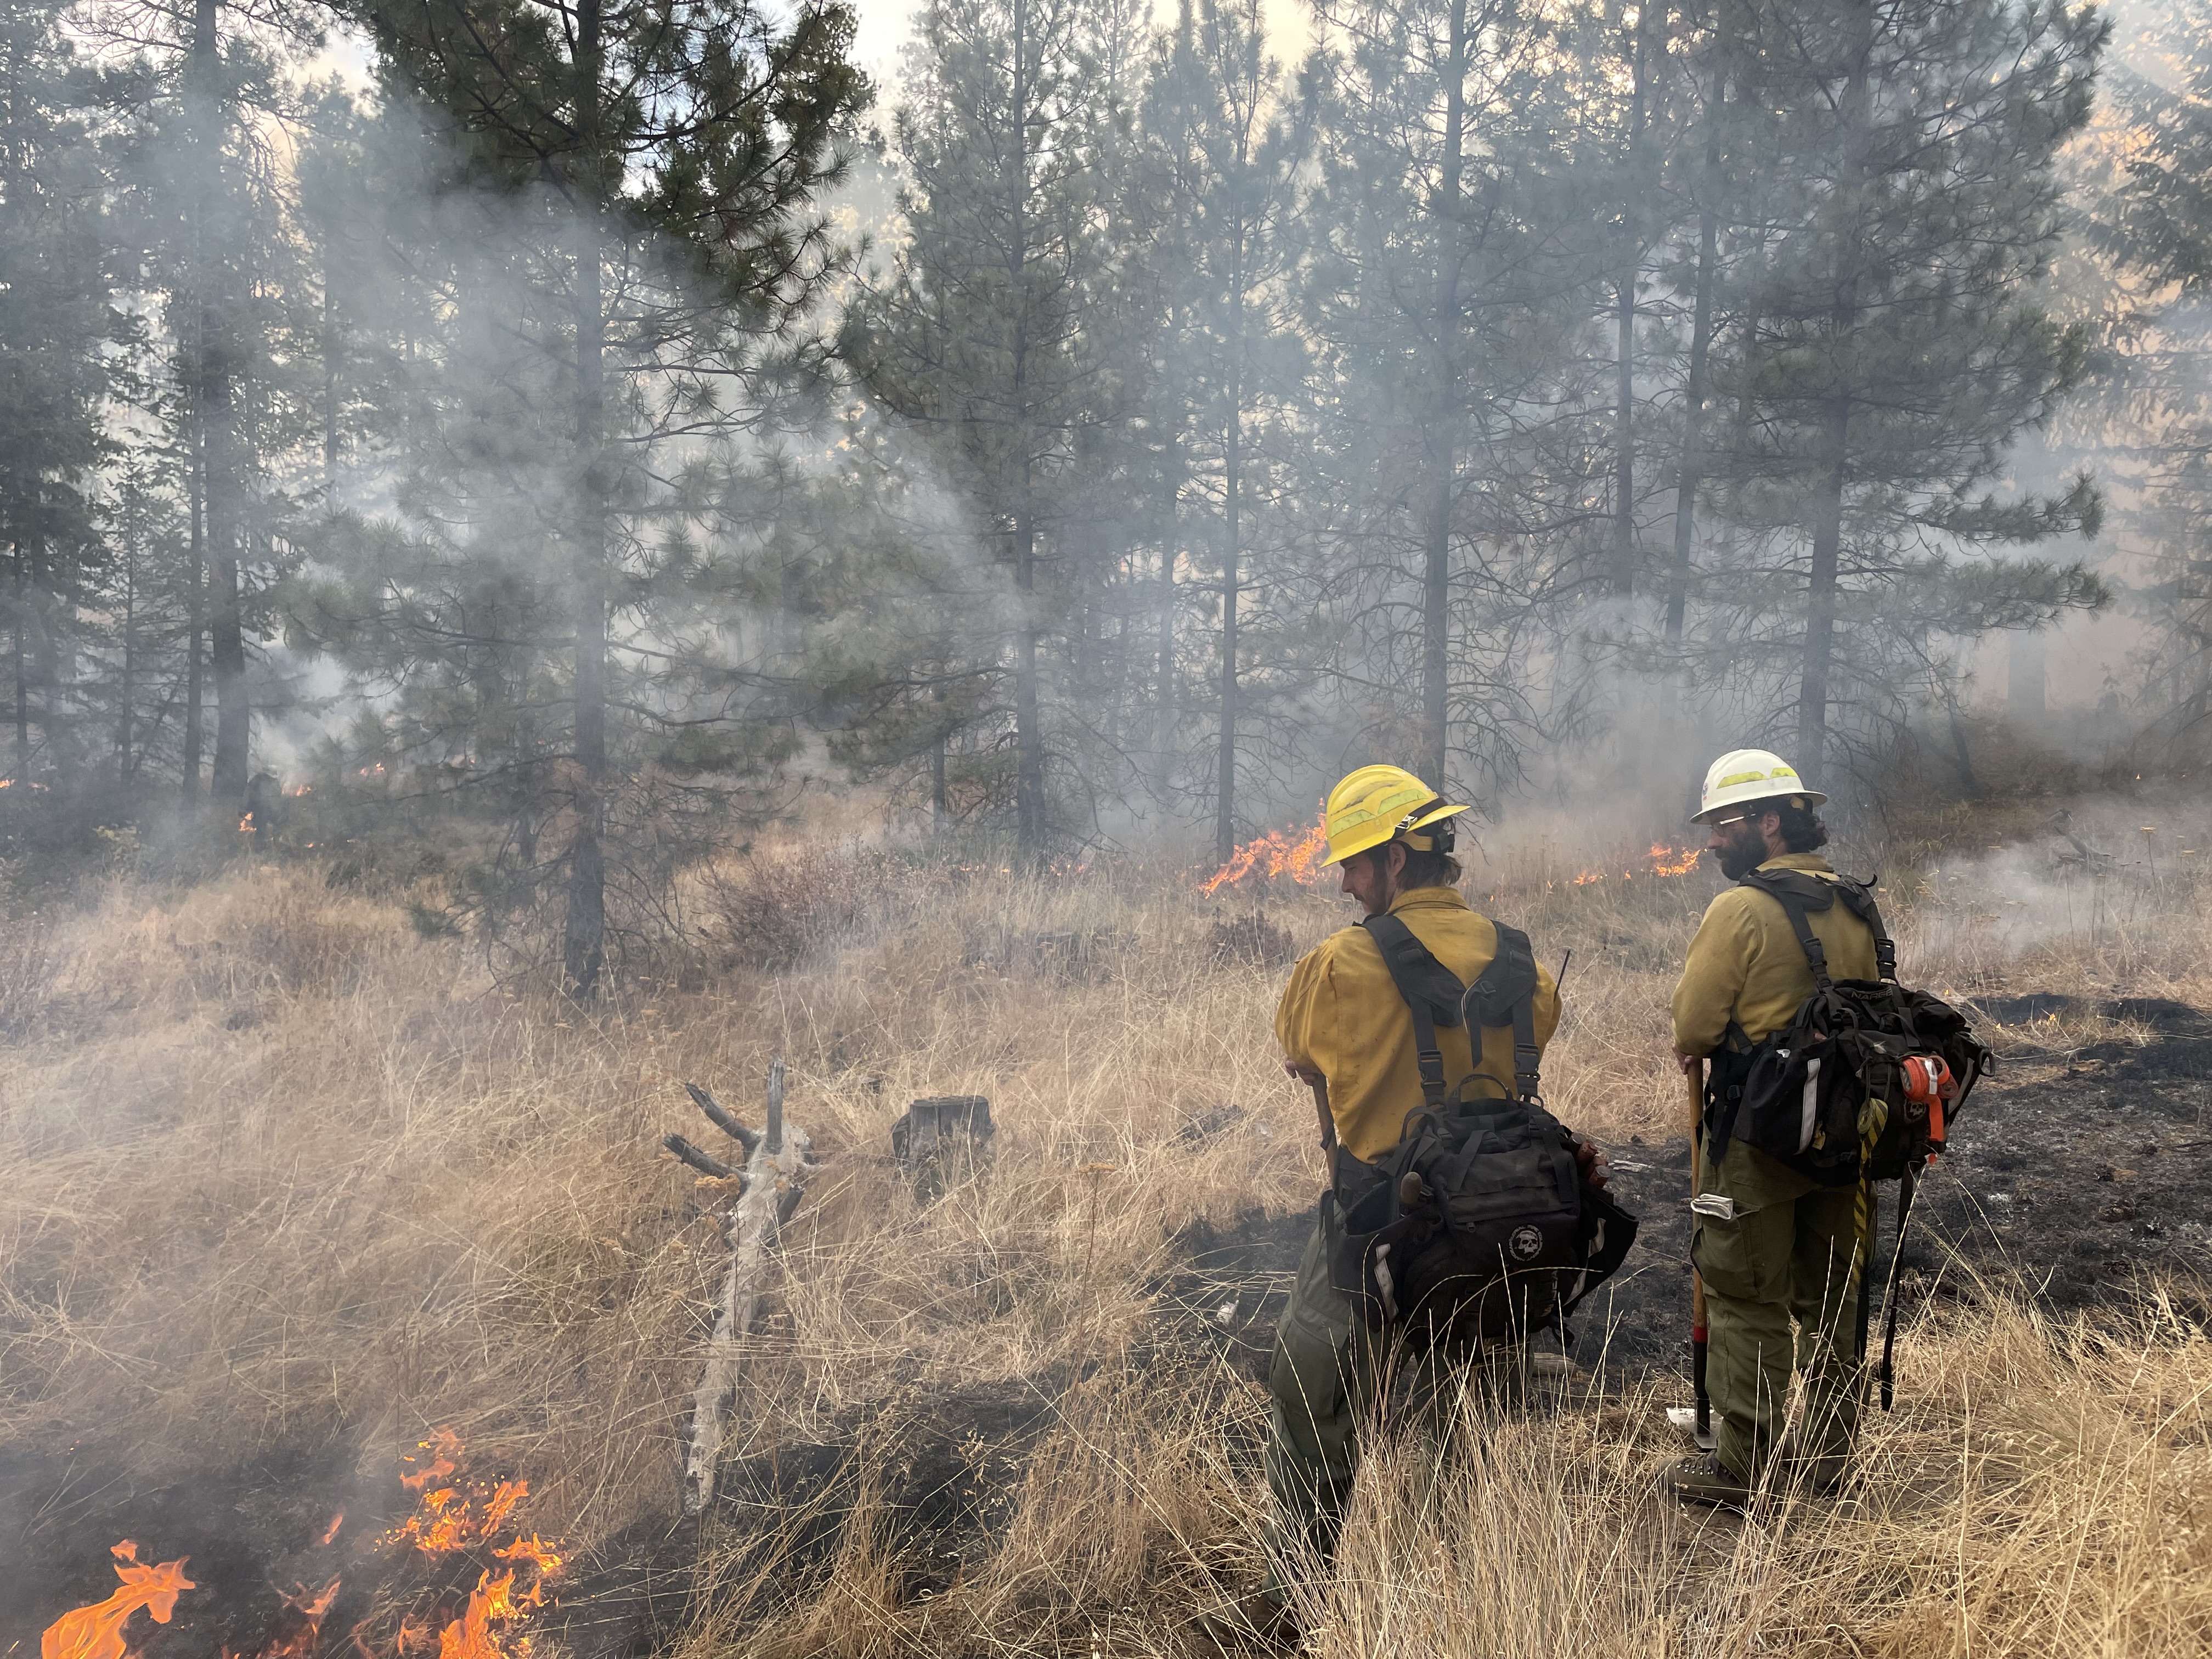 Firefighters with the Washington State Department of Natural Resources conducted a controlled burn in Cougar Canyon near Naches, Washington last fall. Photo courtesy of DNR Communications.